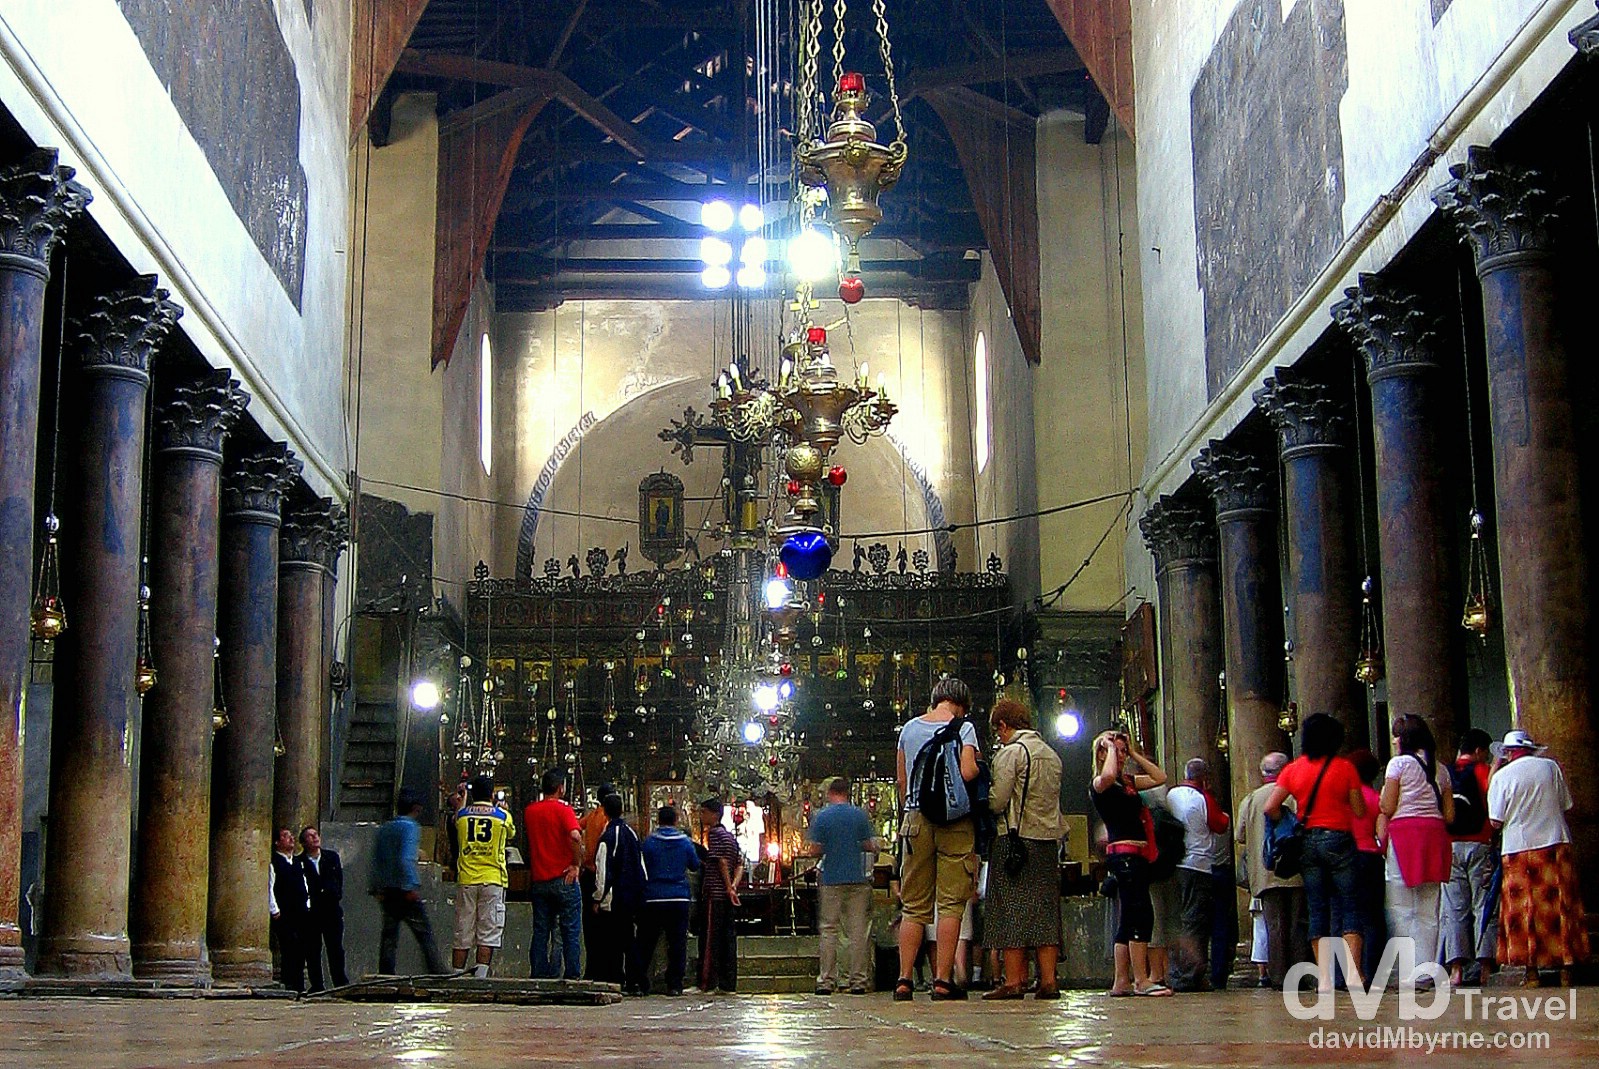 The interior of the Church of the Nativity, traditionally considered to be located over the cave that marks the birthplace of Jesus of Nazareth. Bethlehem, Palestine. May 2, 2008.